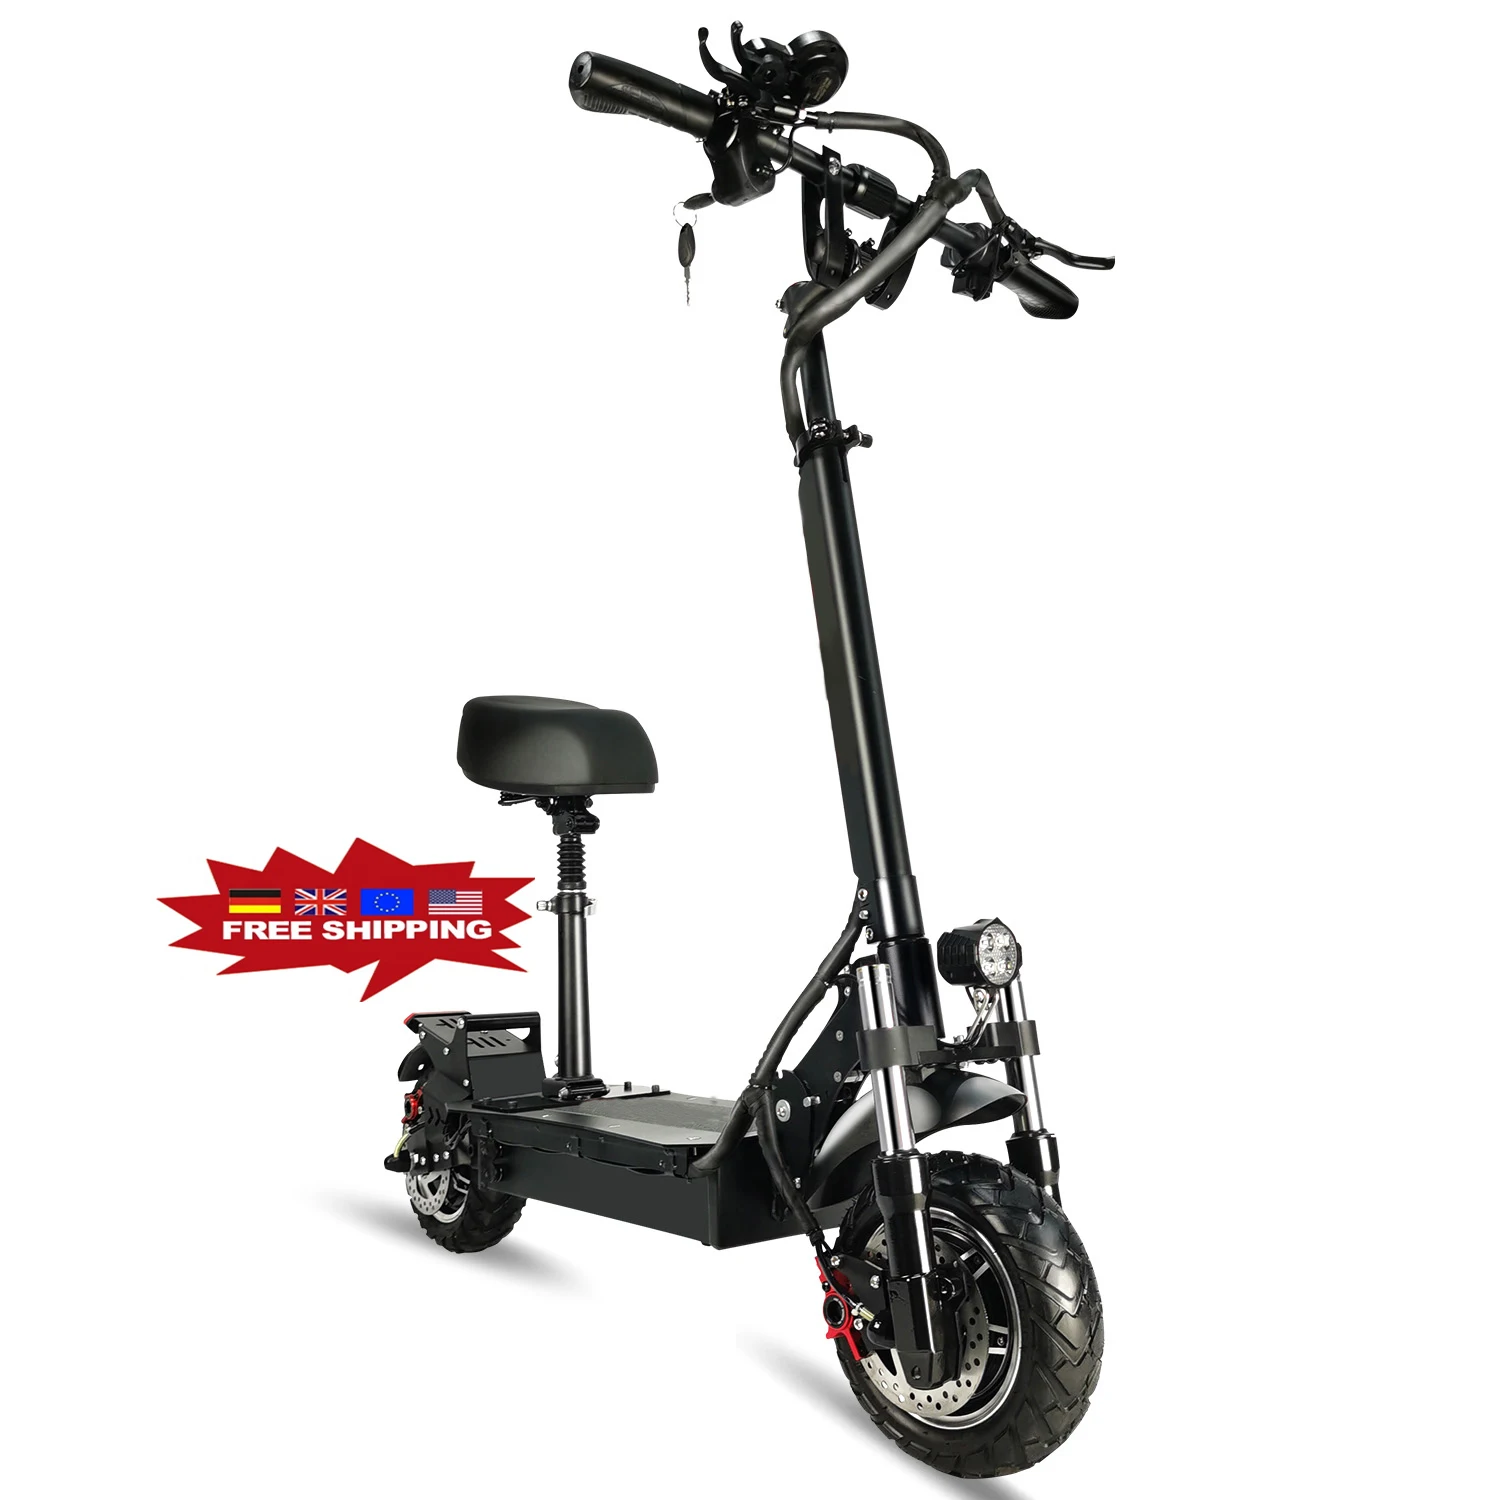 

UK Stock 2400w scooter electric 60V 27ah speed 75kmh dual motor electric scooter eu warehouse free shipping with seat